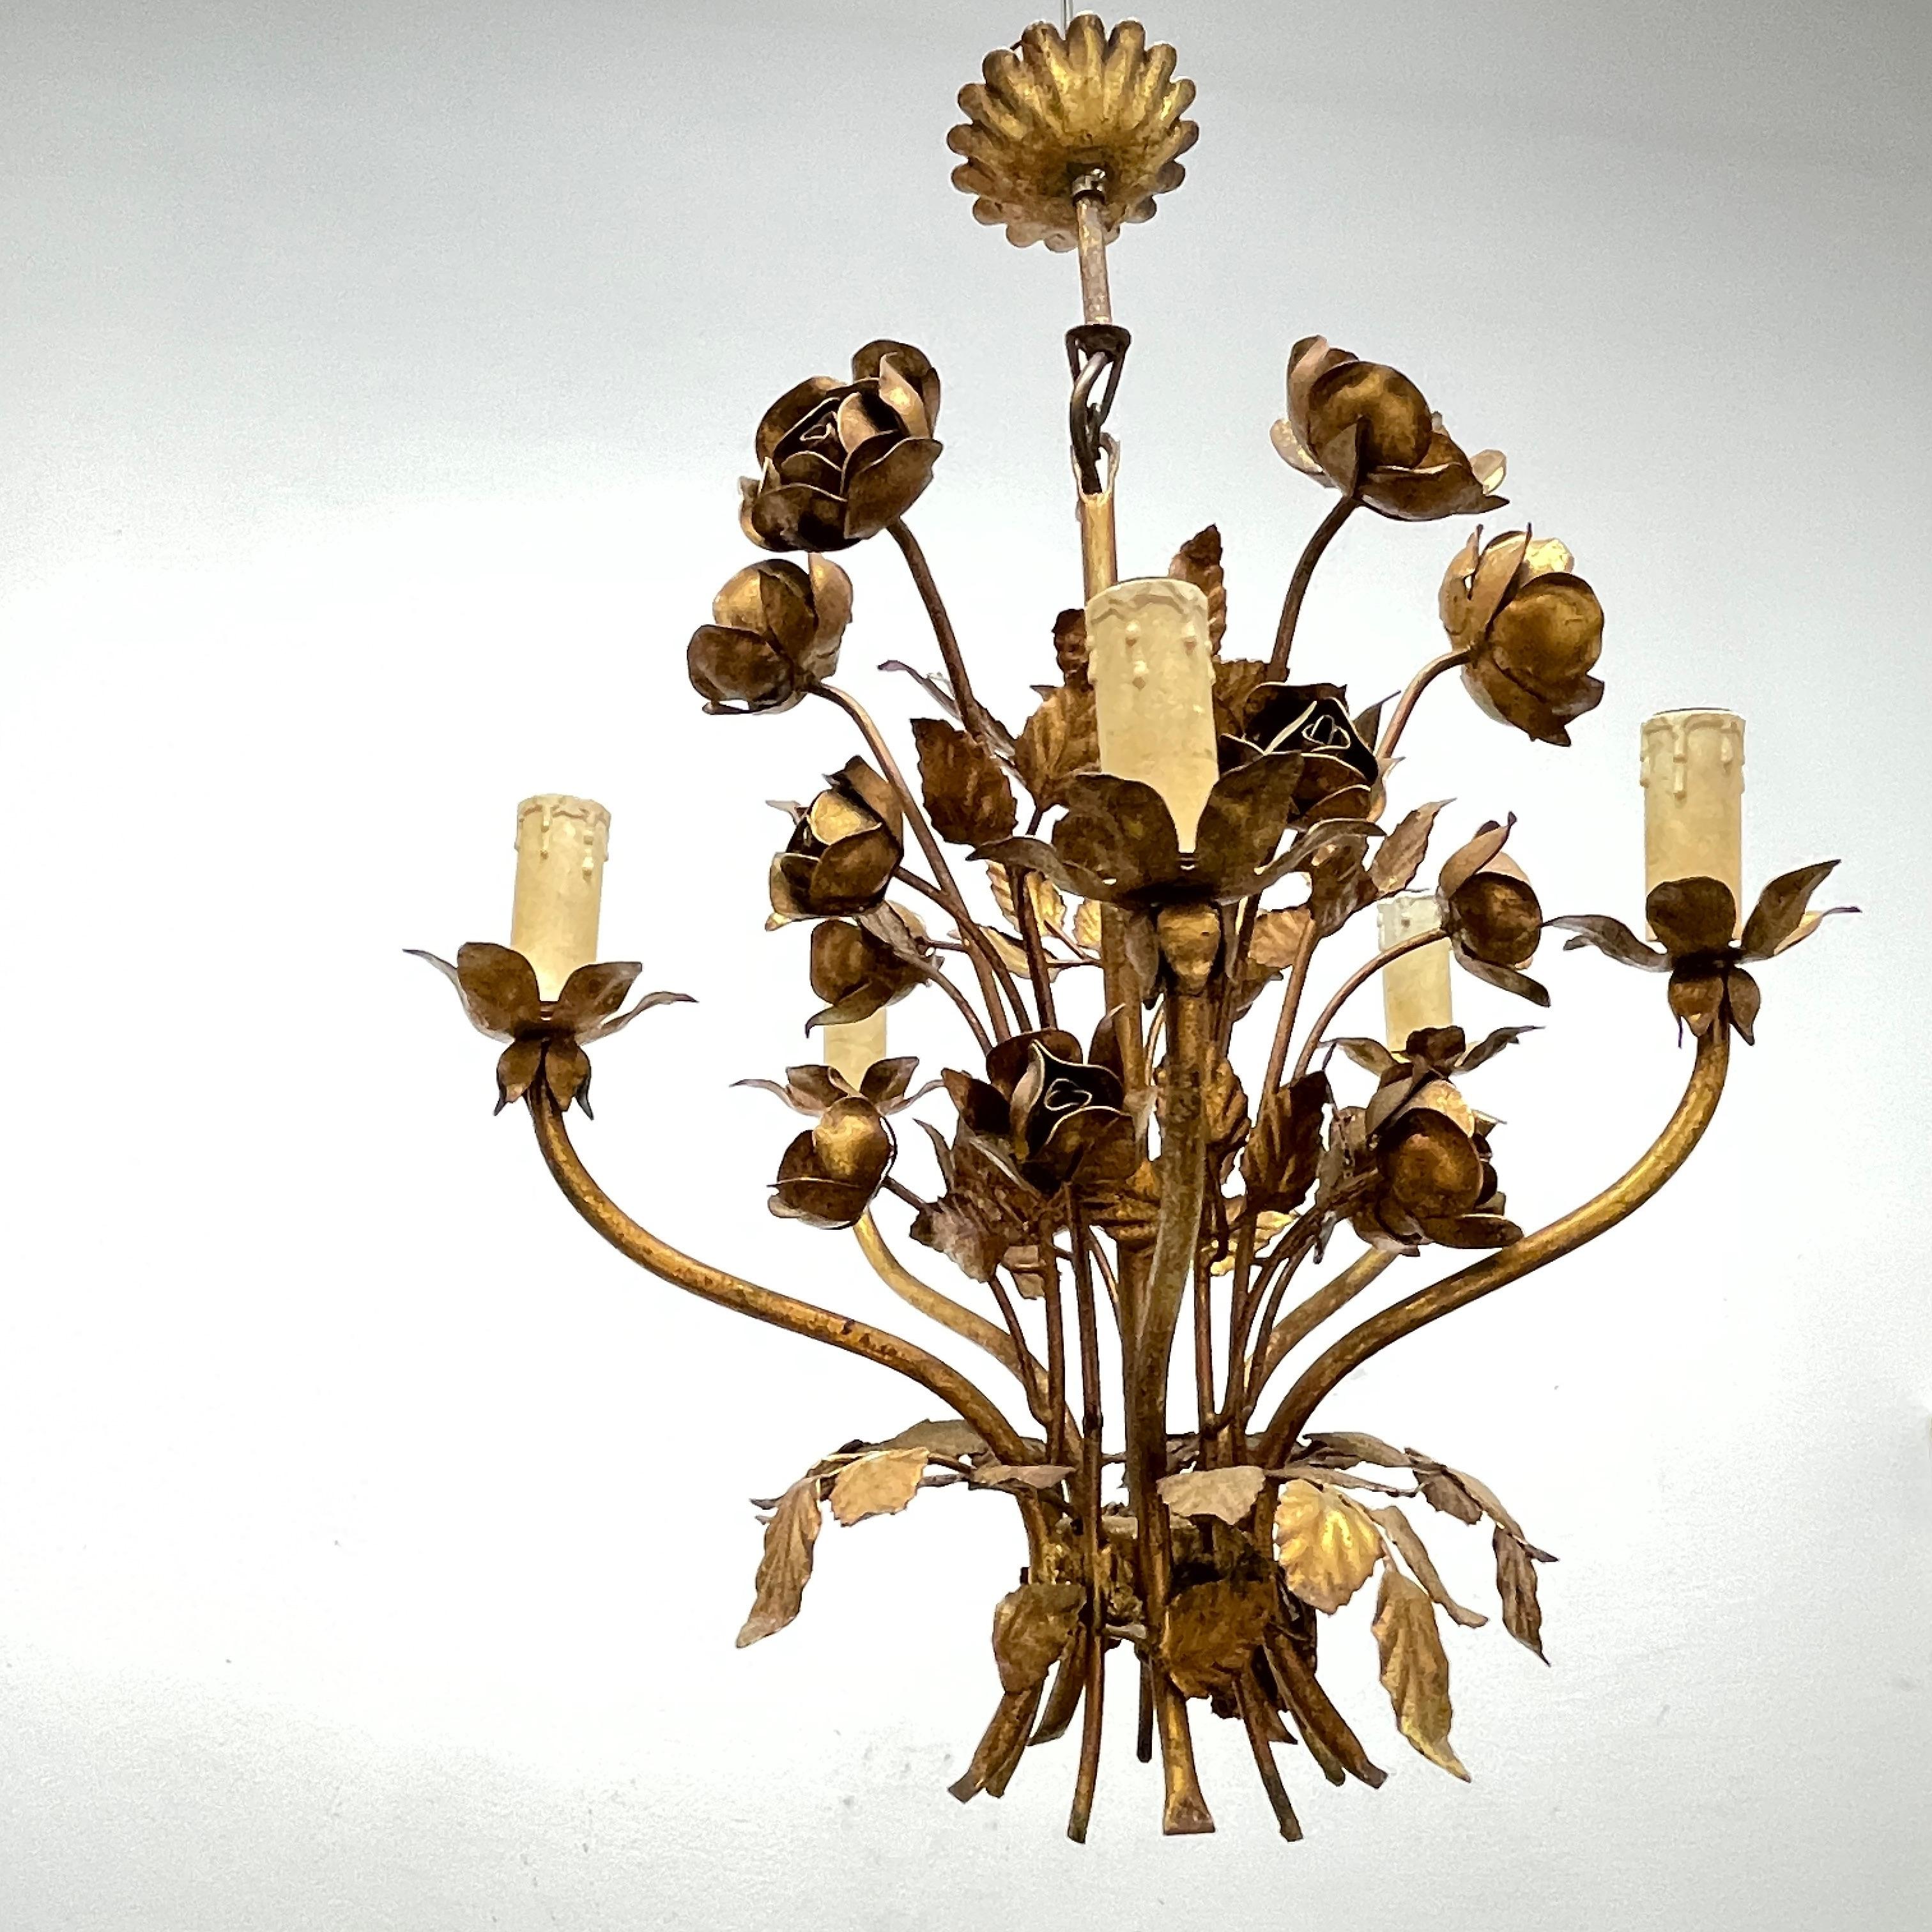 A Hollywood Regency midcentury gilt tole roses chandelier, the fixture requires five European E14 candelabra bulbs, each bulb up to 40 watts. This light has a beautiful patina and gives each room an eclectic statement.